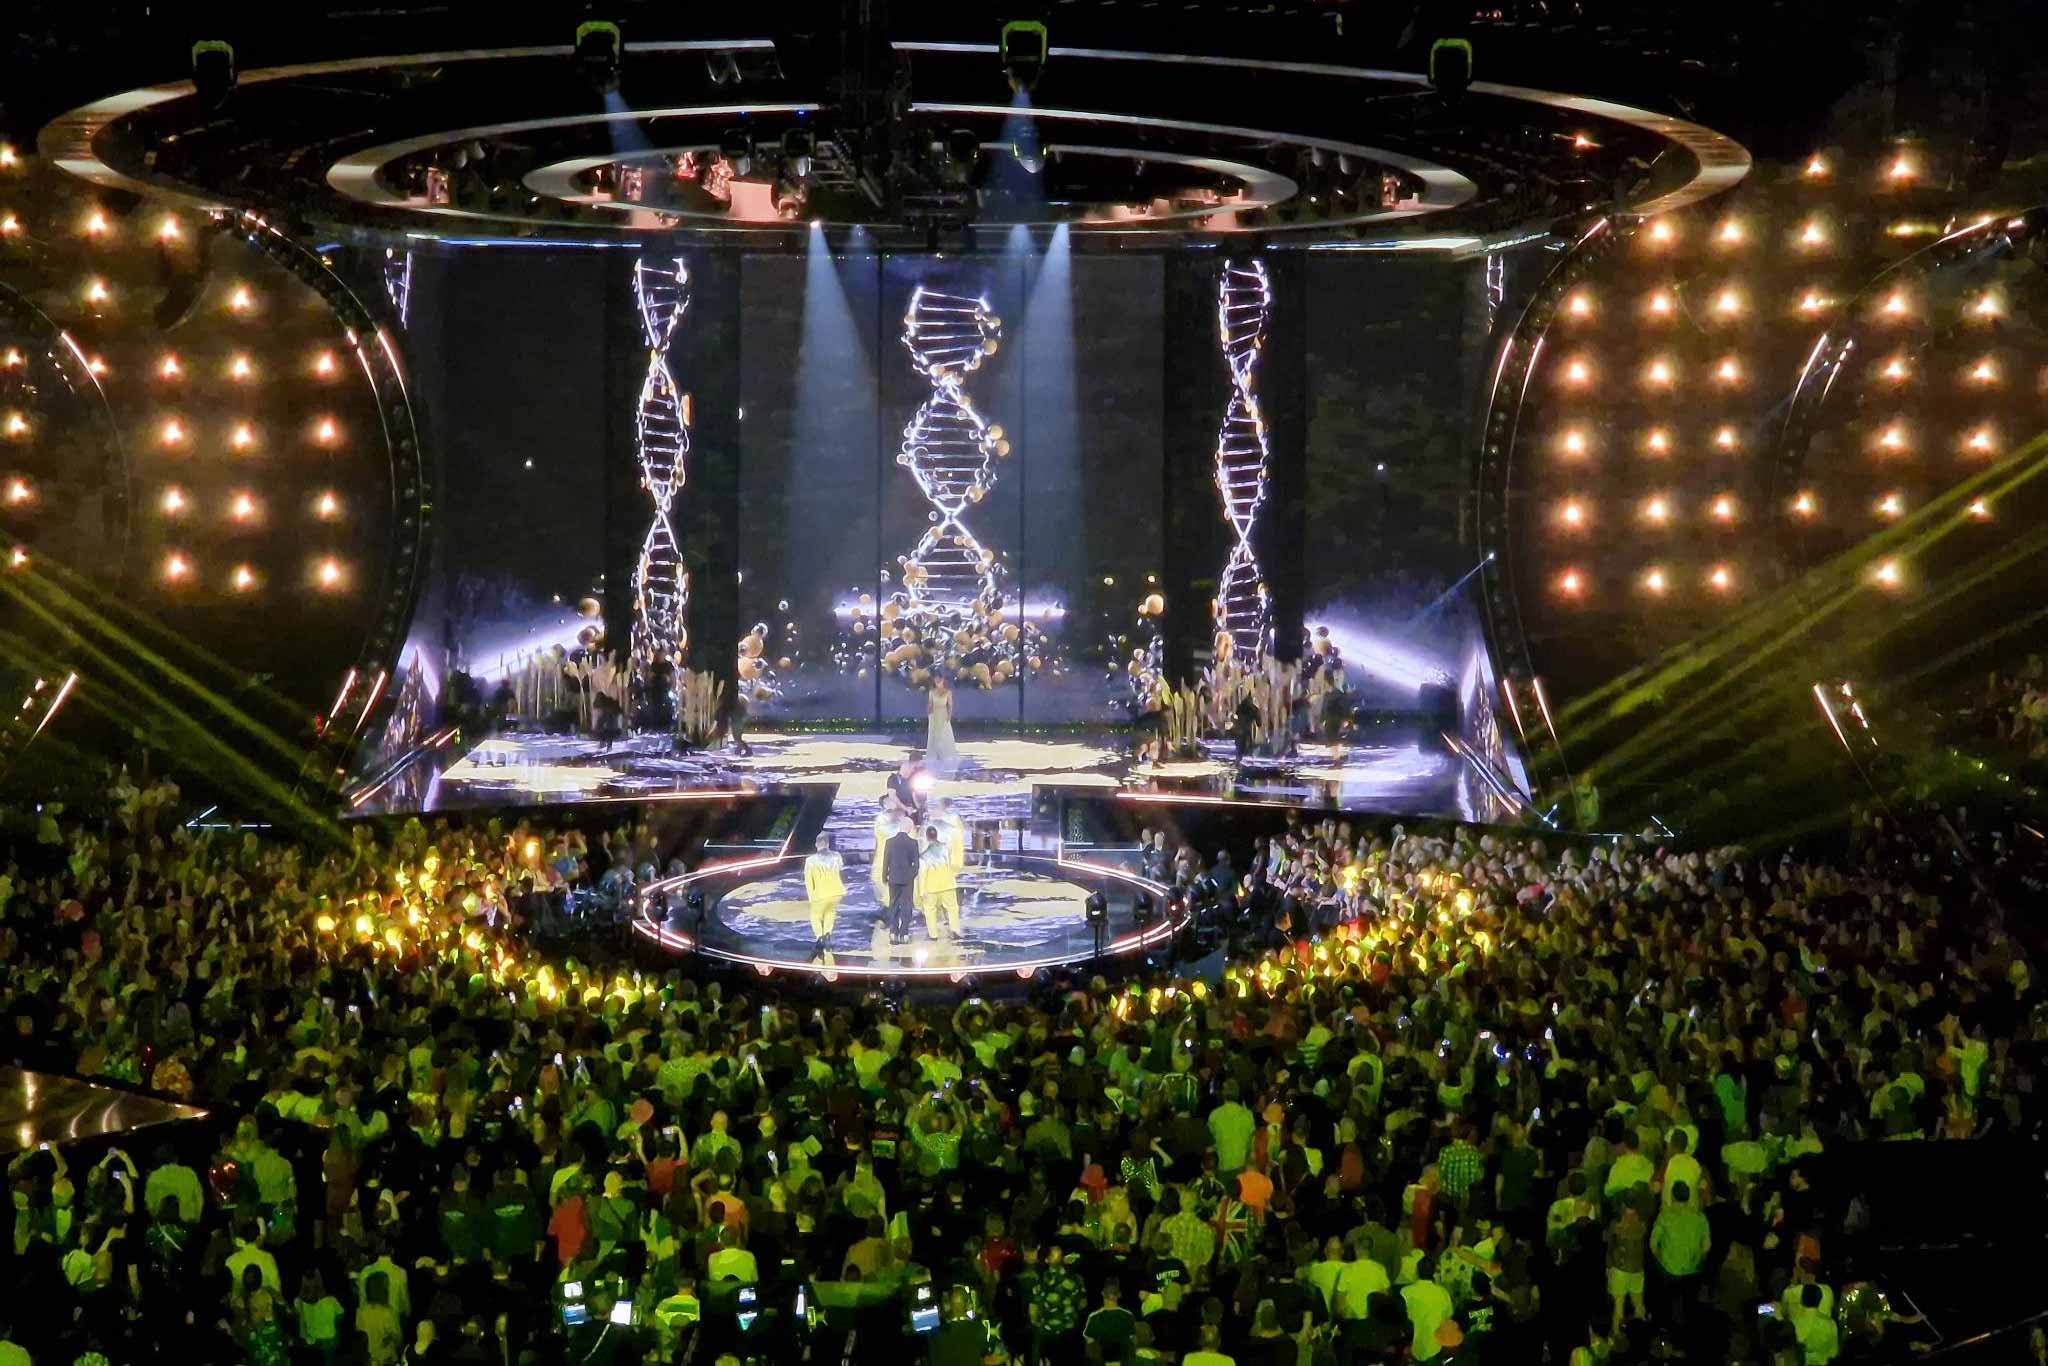 A performance during the semi-final of the 2023 Eurovision song contest, which is held in Liverpool, UK. © Anatoliy Dobrovolskiy